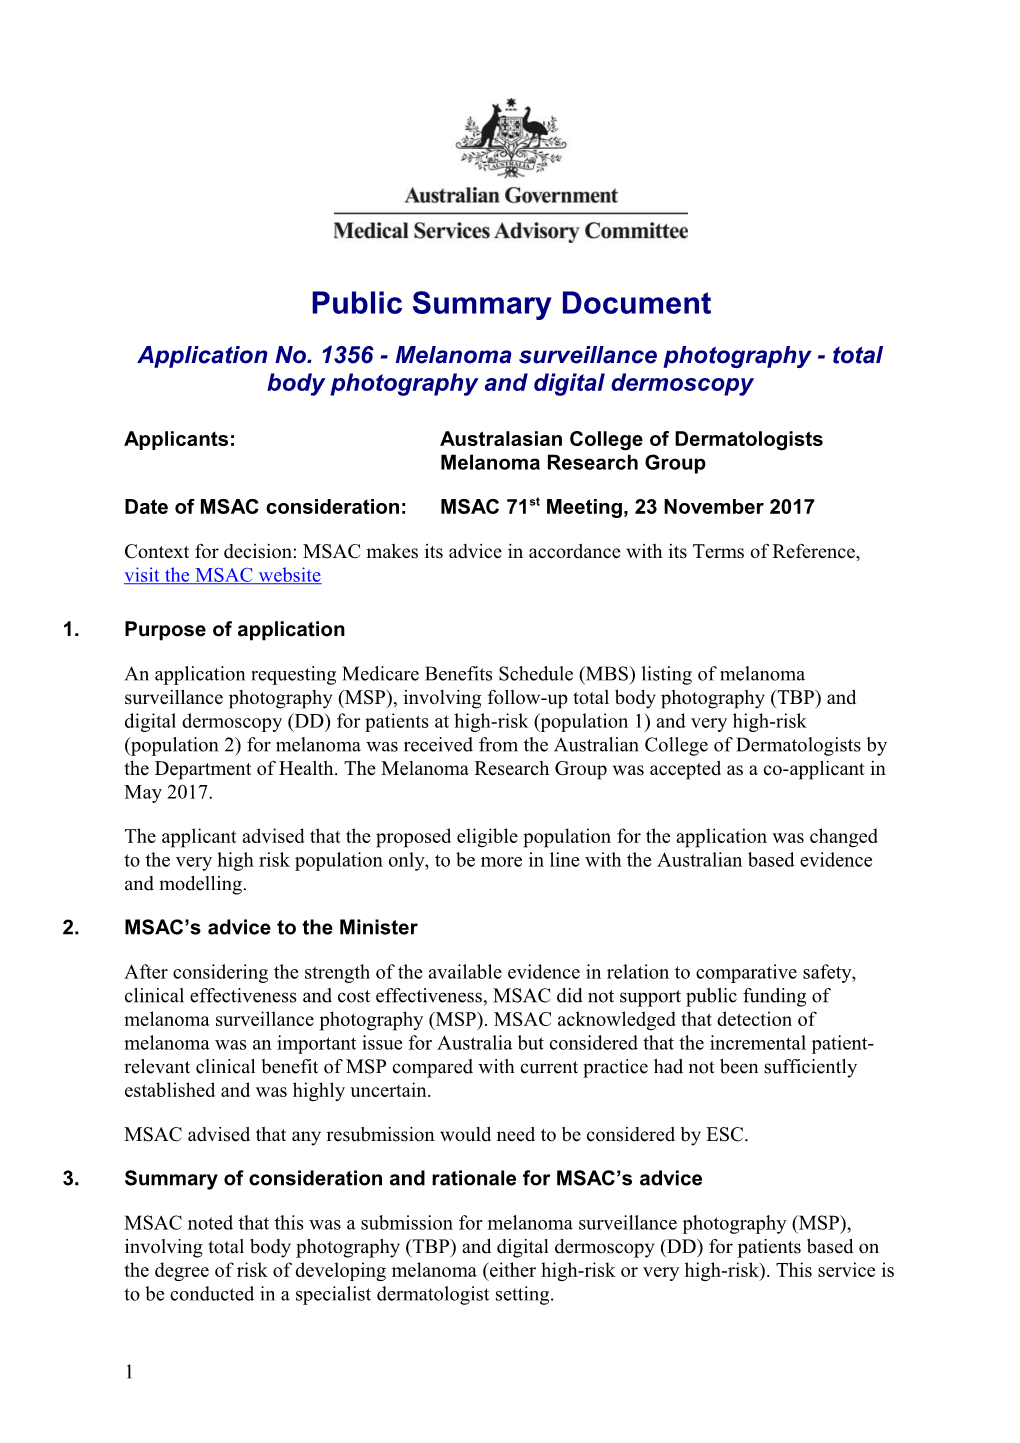 Application No. 1356 - Melanoma Surveillance Photography - Total Body Photography And